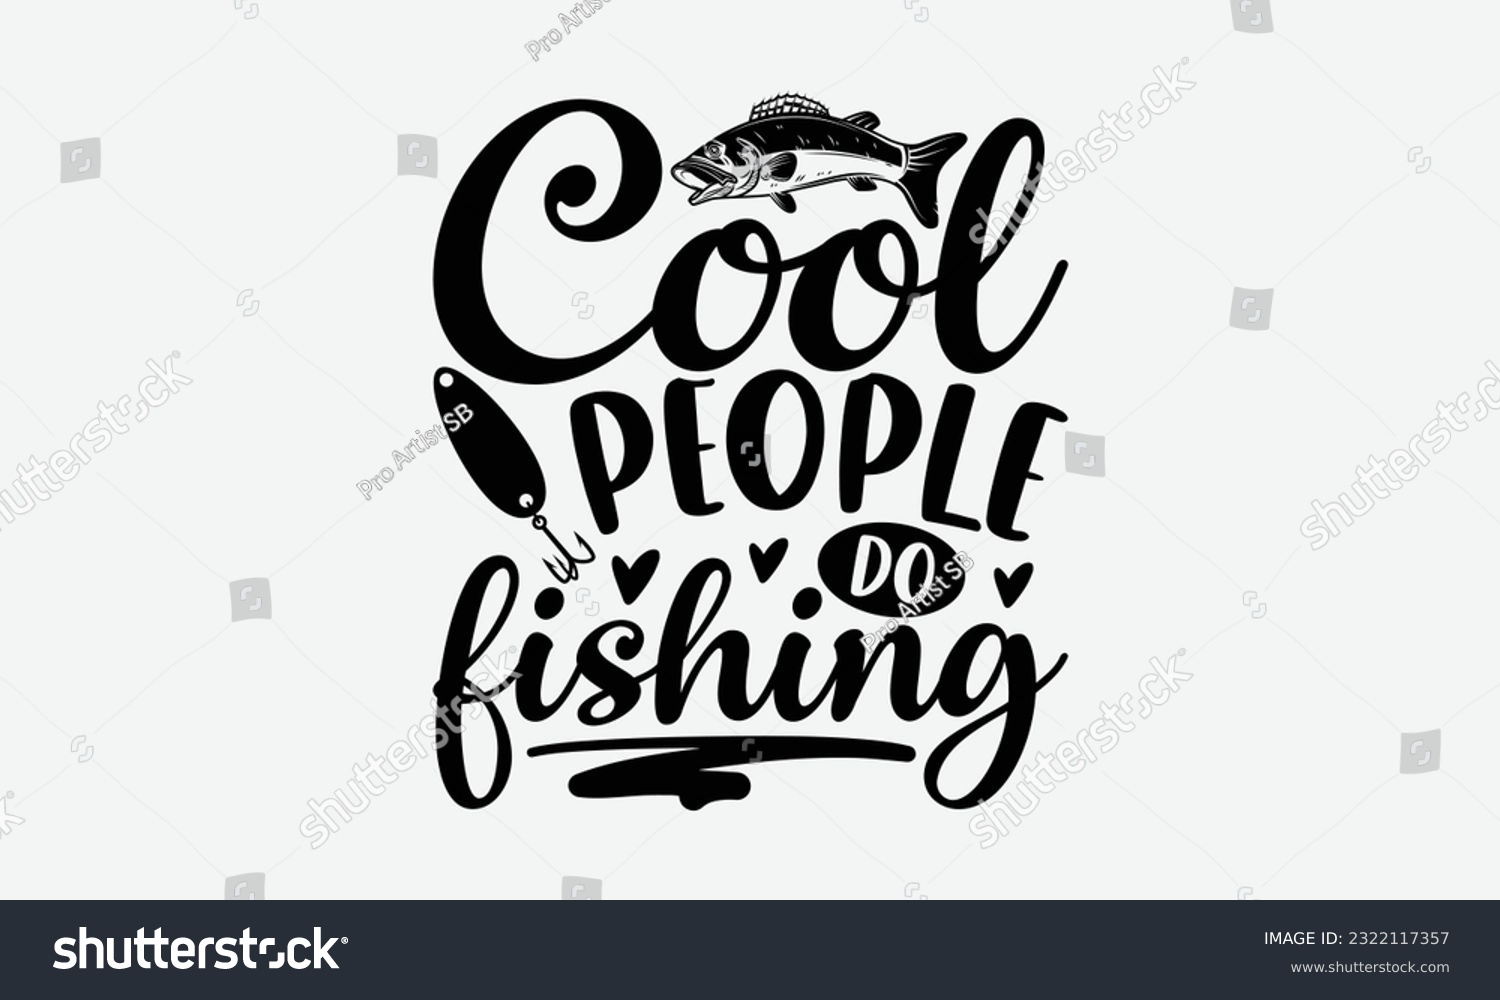 SVG of Cool People Do Fishing - Fishing SVG Design, Fisherman Quotes, Hand Written Vector T-Shirt Design, For Prints on Mugs and Bags, Posters. svg